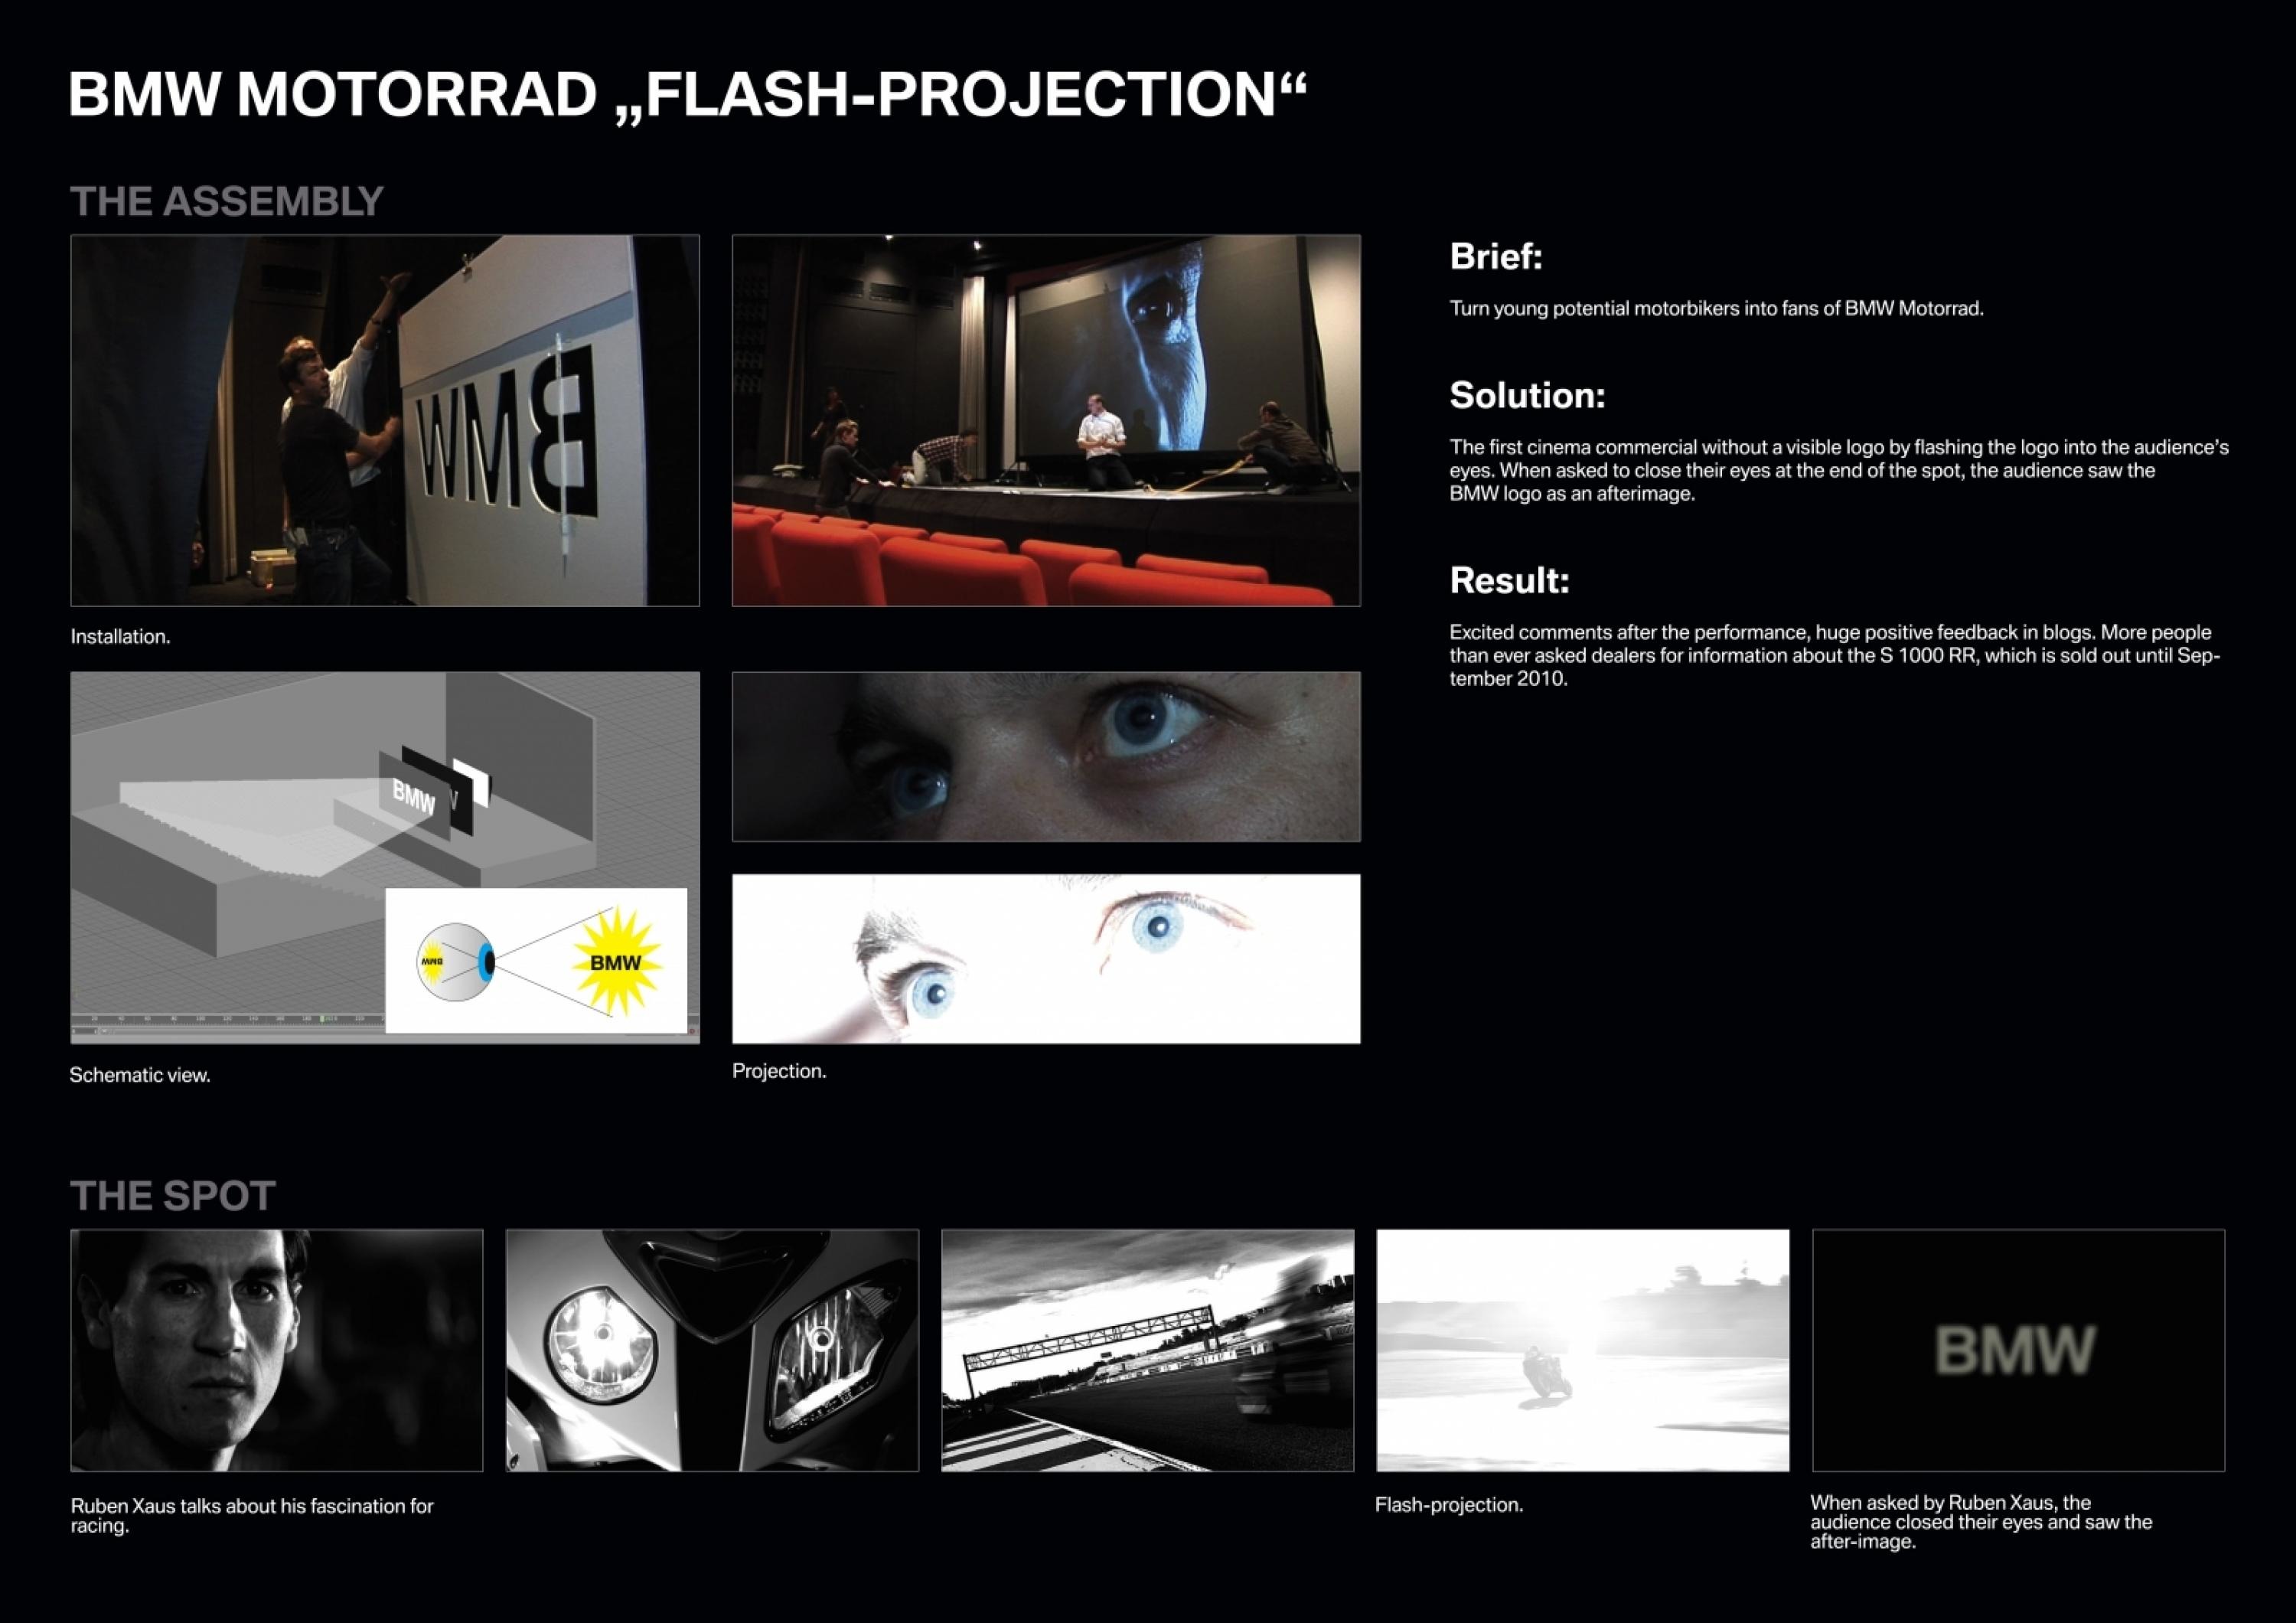 FLASH PROJECTION